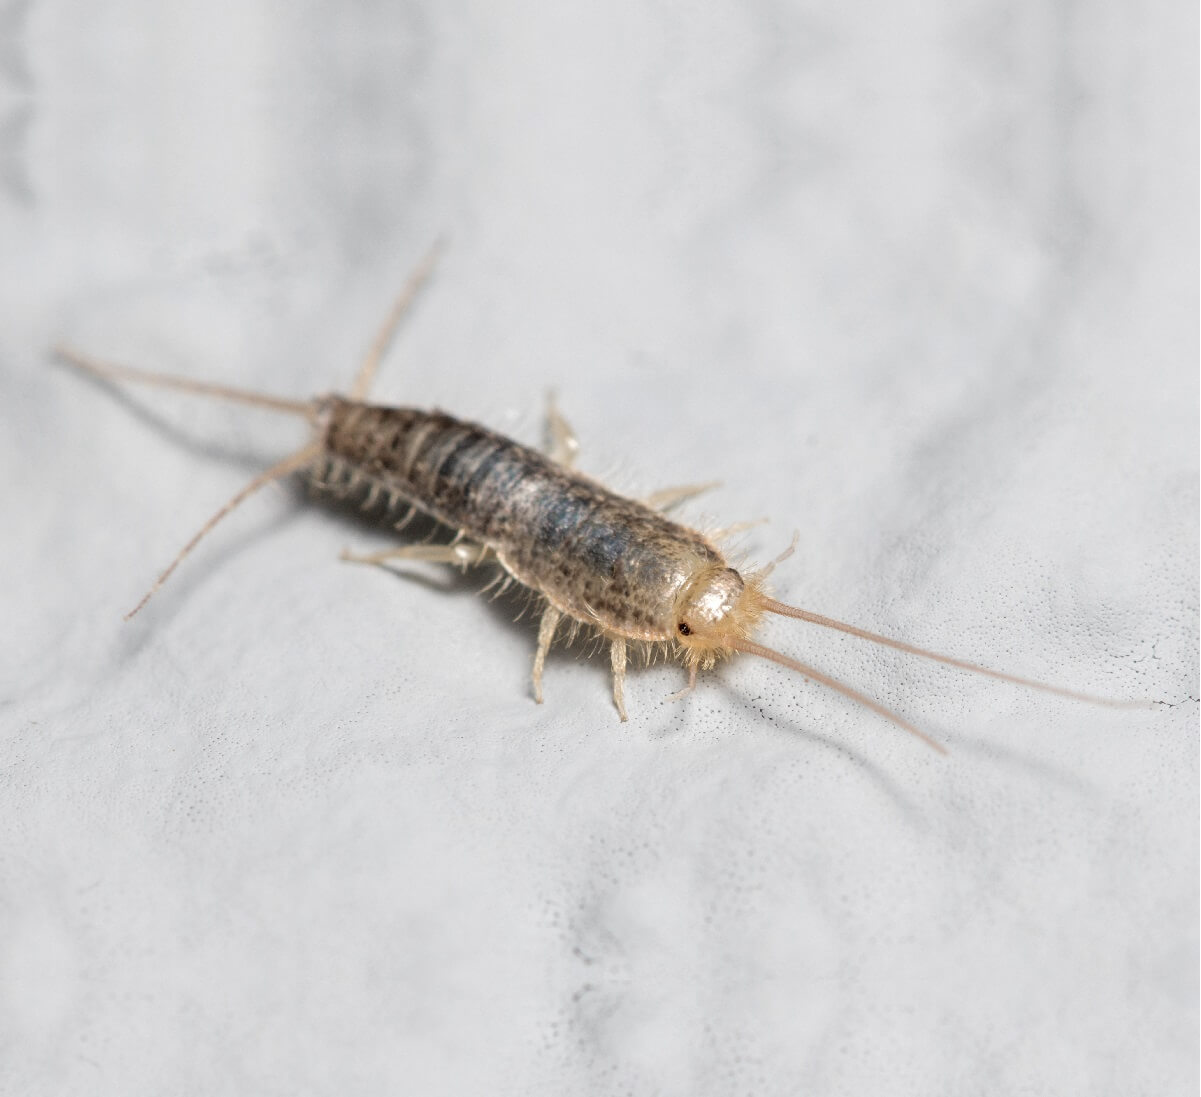 Silverfish on light material - get rid of silverfish with Brisbane City Pest Control